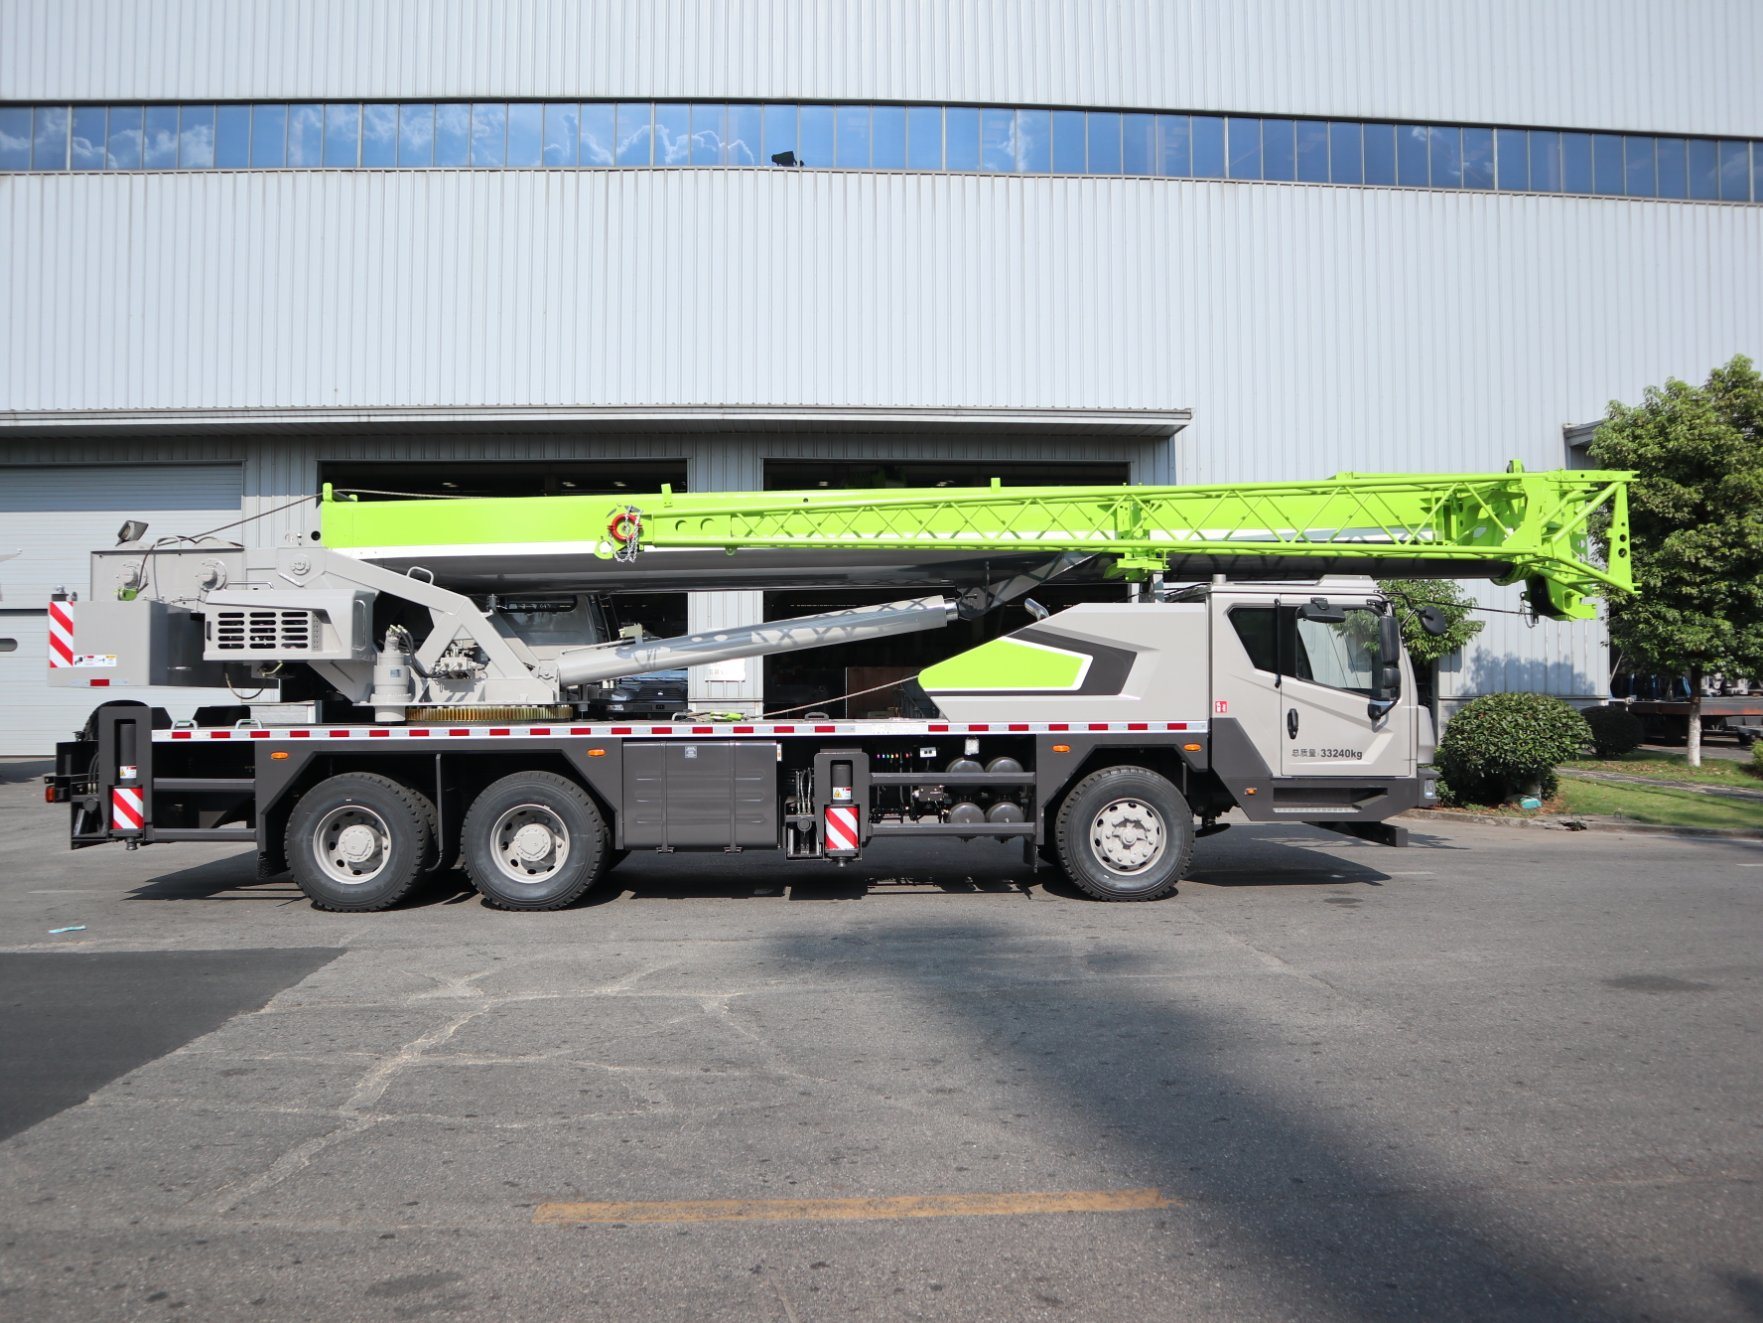 Zoomlion 25t Qy25h552 Mobile Truck Crane Price